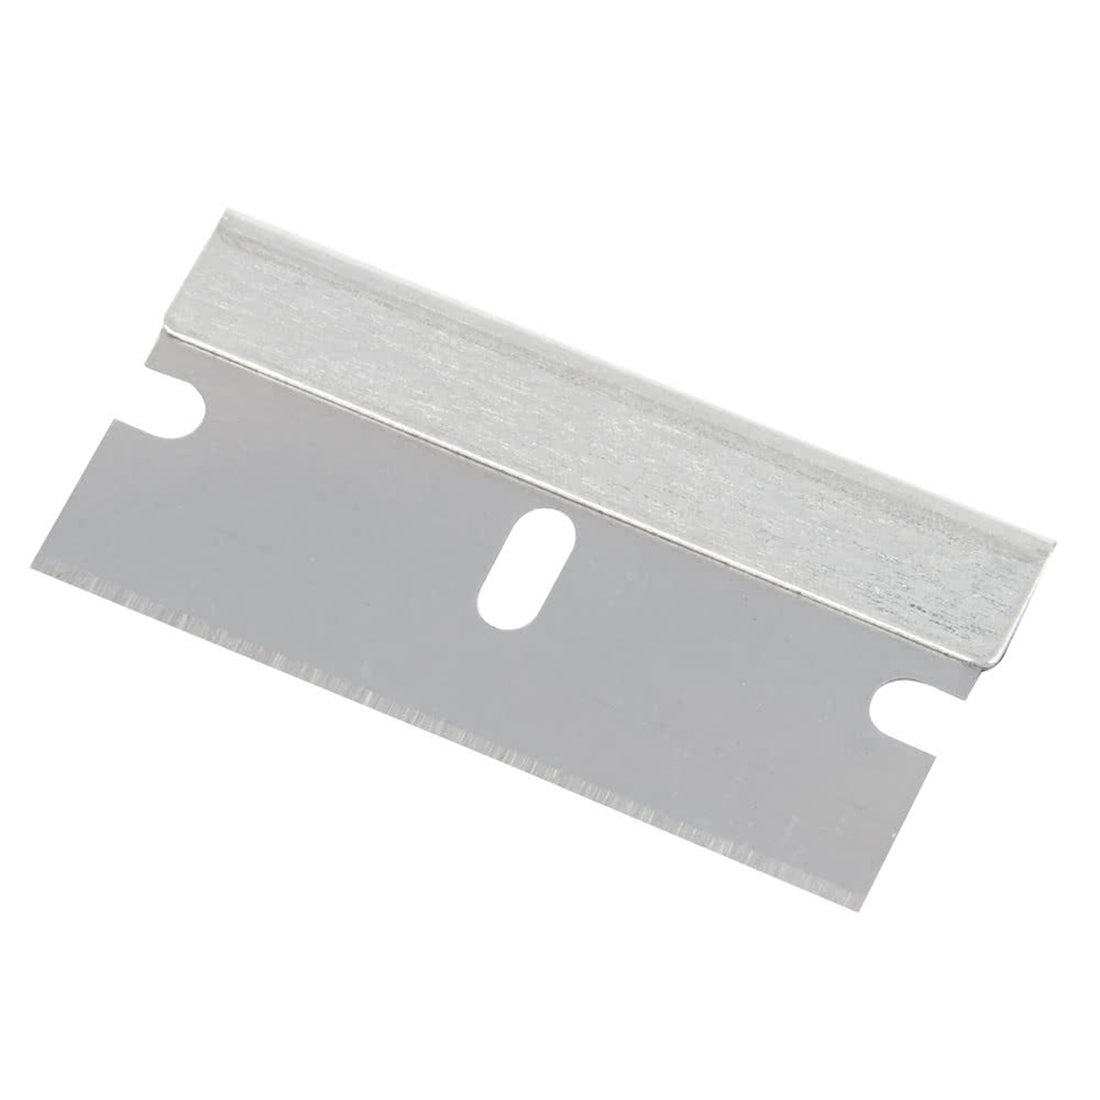 Sörbo Razor Blades - Pack of Ten - Single TIlted Right View